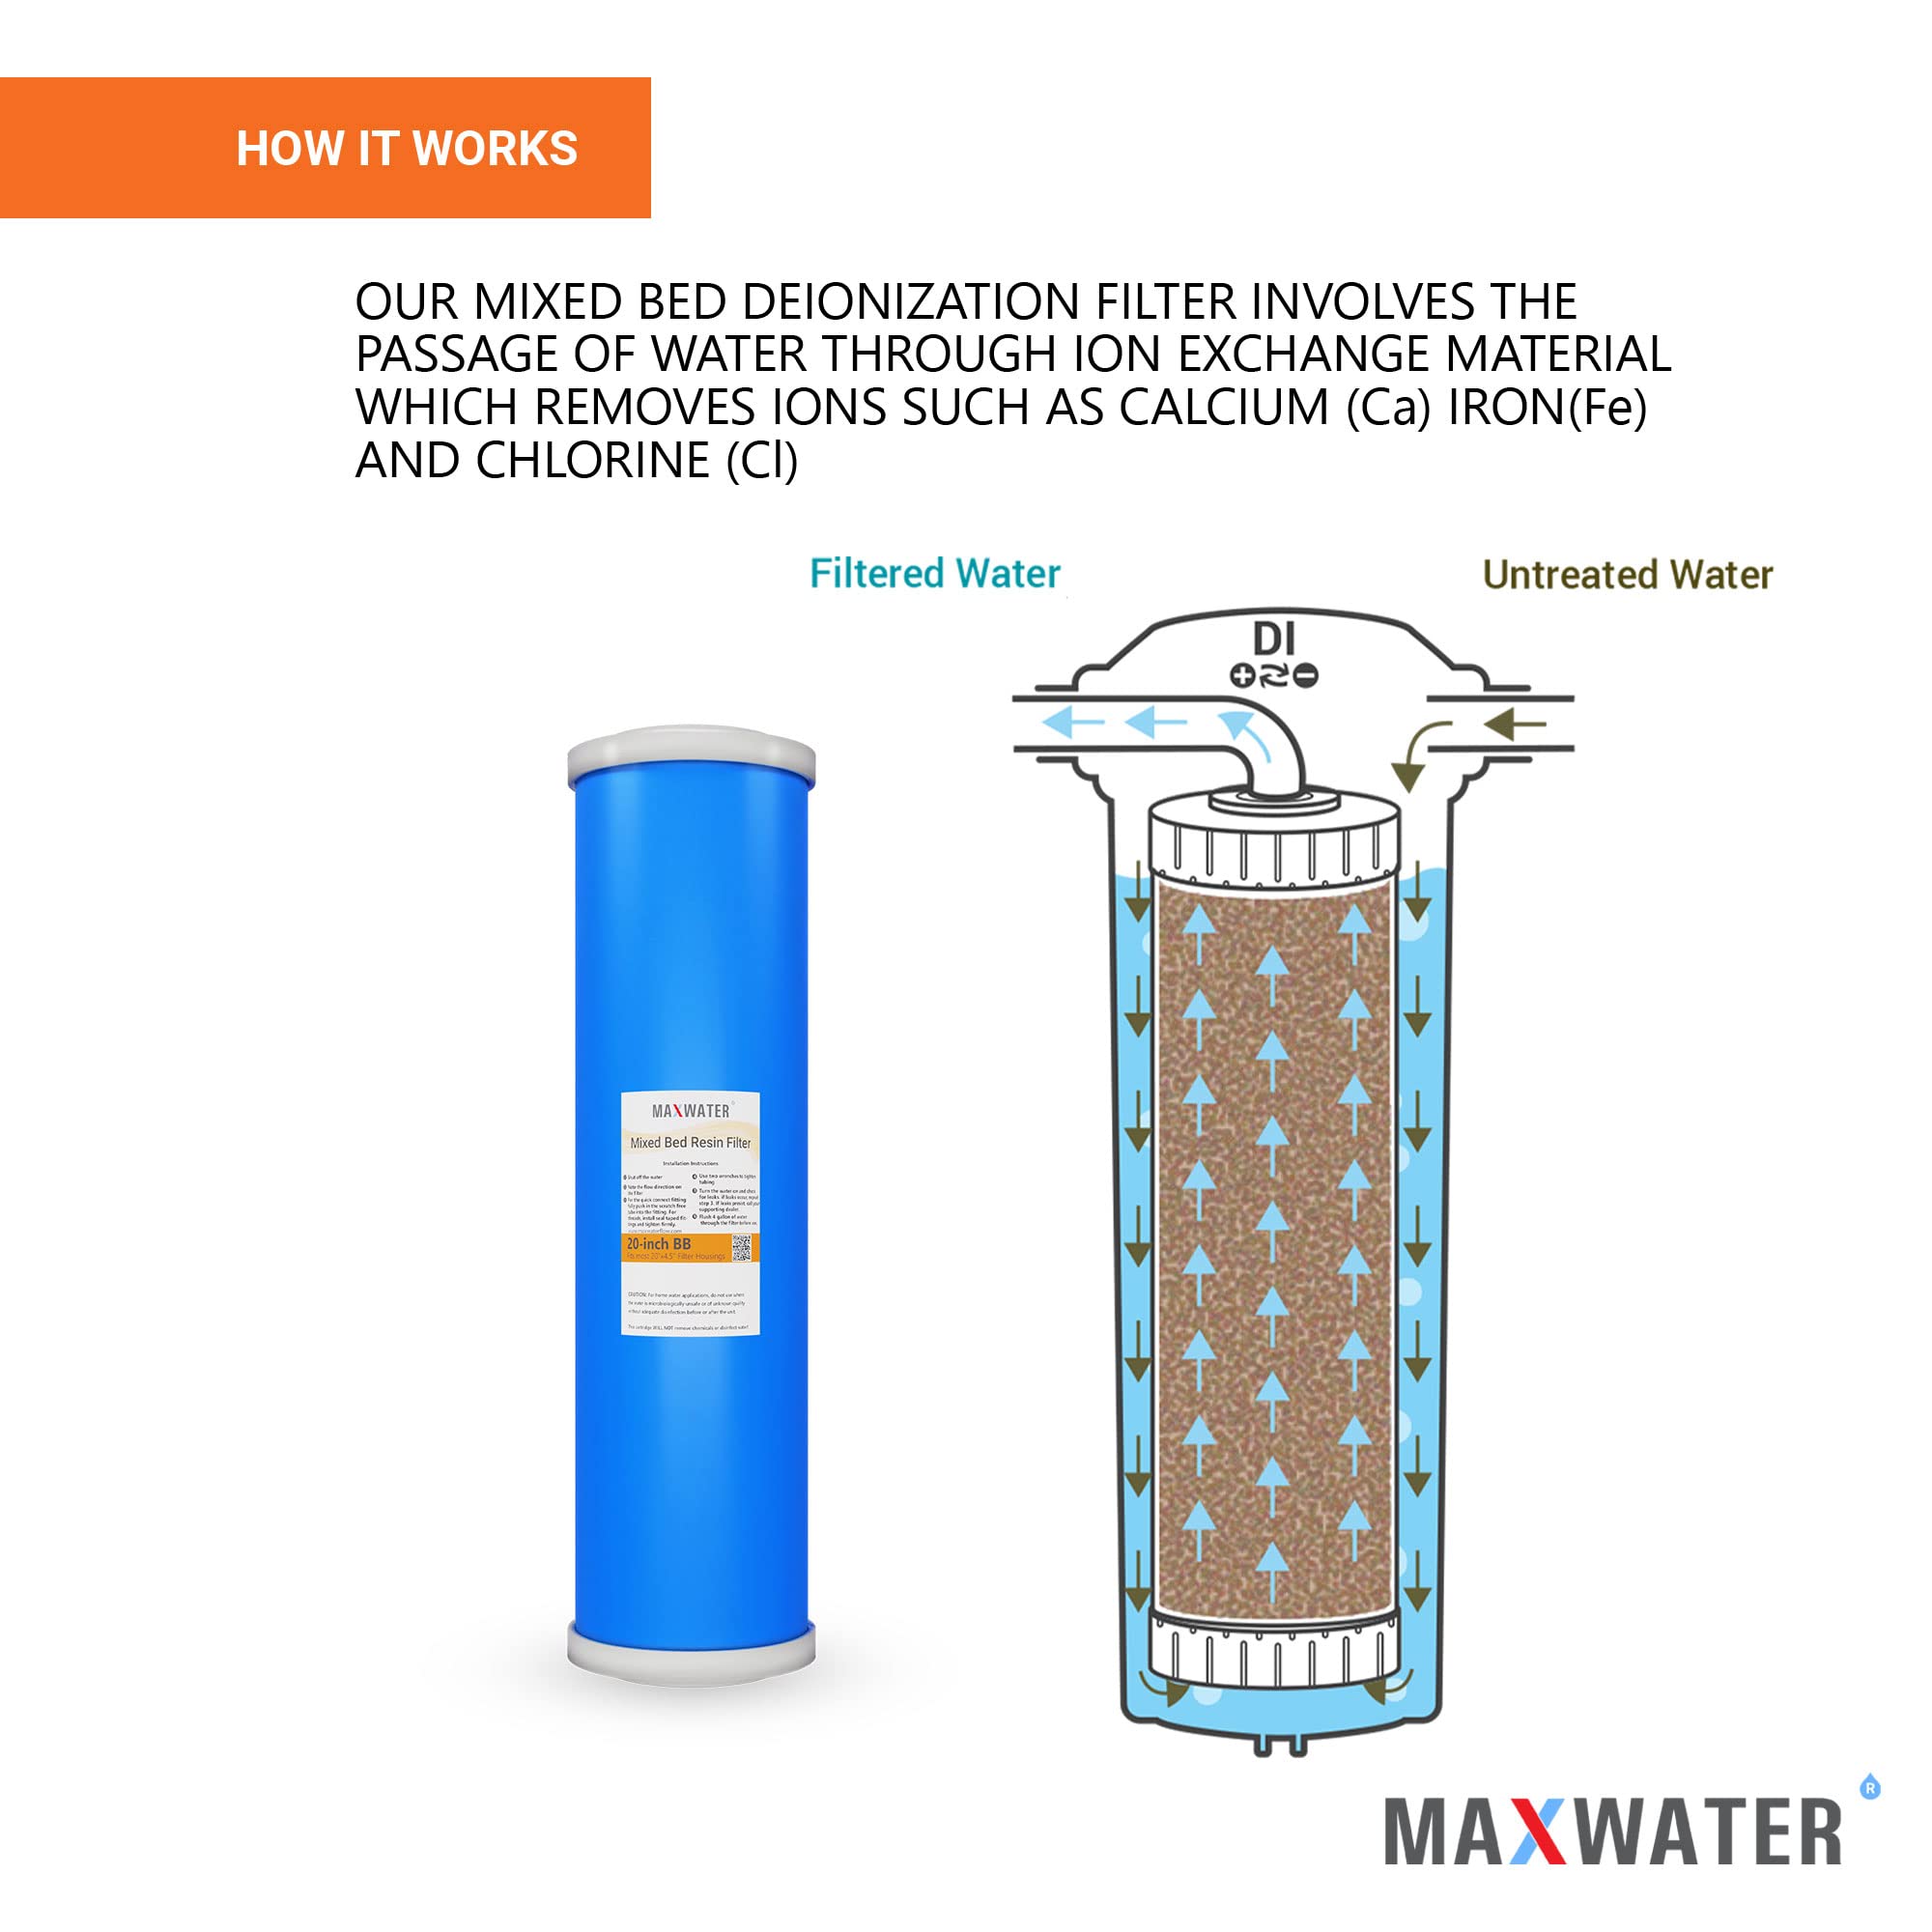 Max Water 20" BB Whole House Refillable Mixed Bed De-Ionization Water Filter Size 20" x 4.5" Compatible with 20" BB Whole House Water Filtration Systems for High TDS in Water (1x car/window)